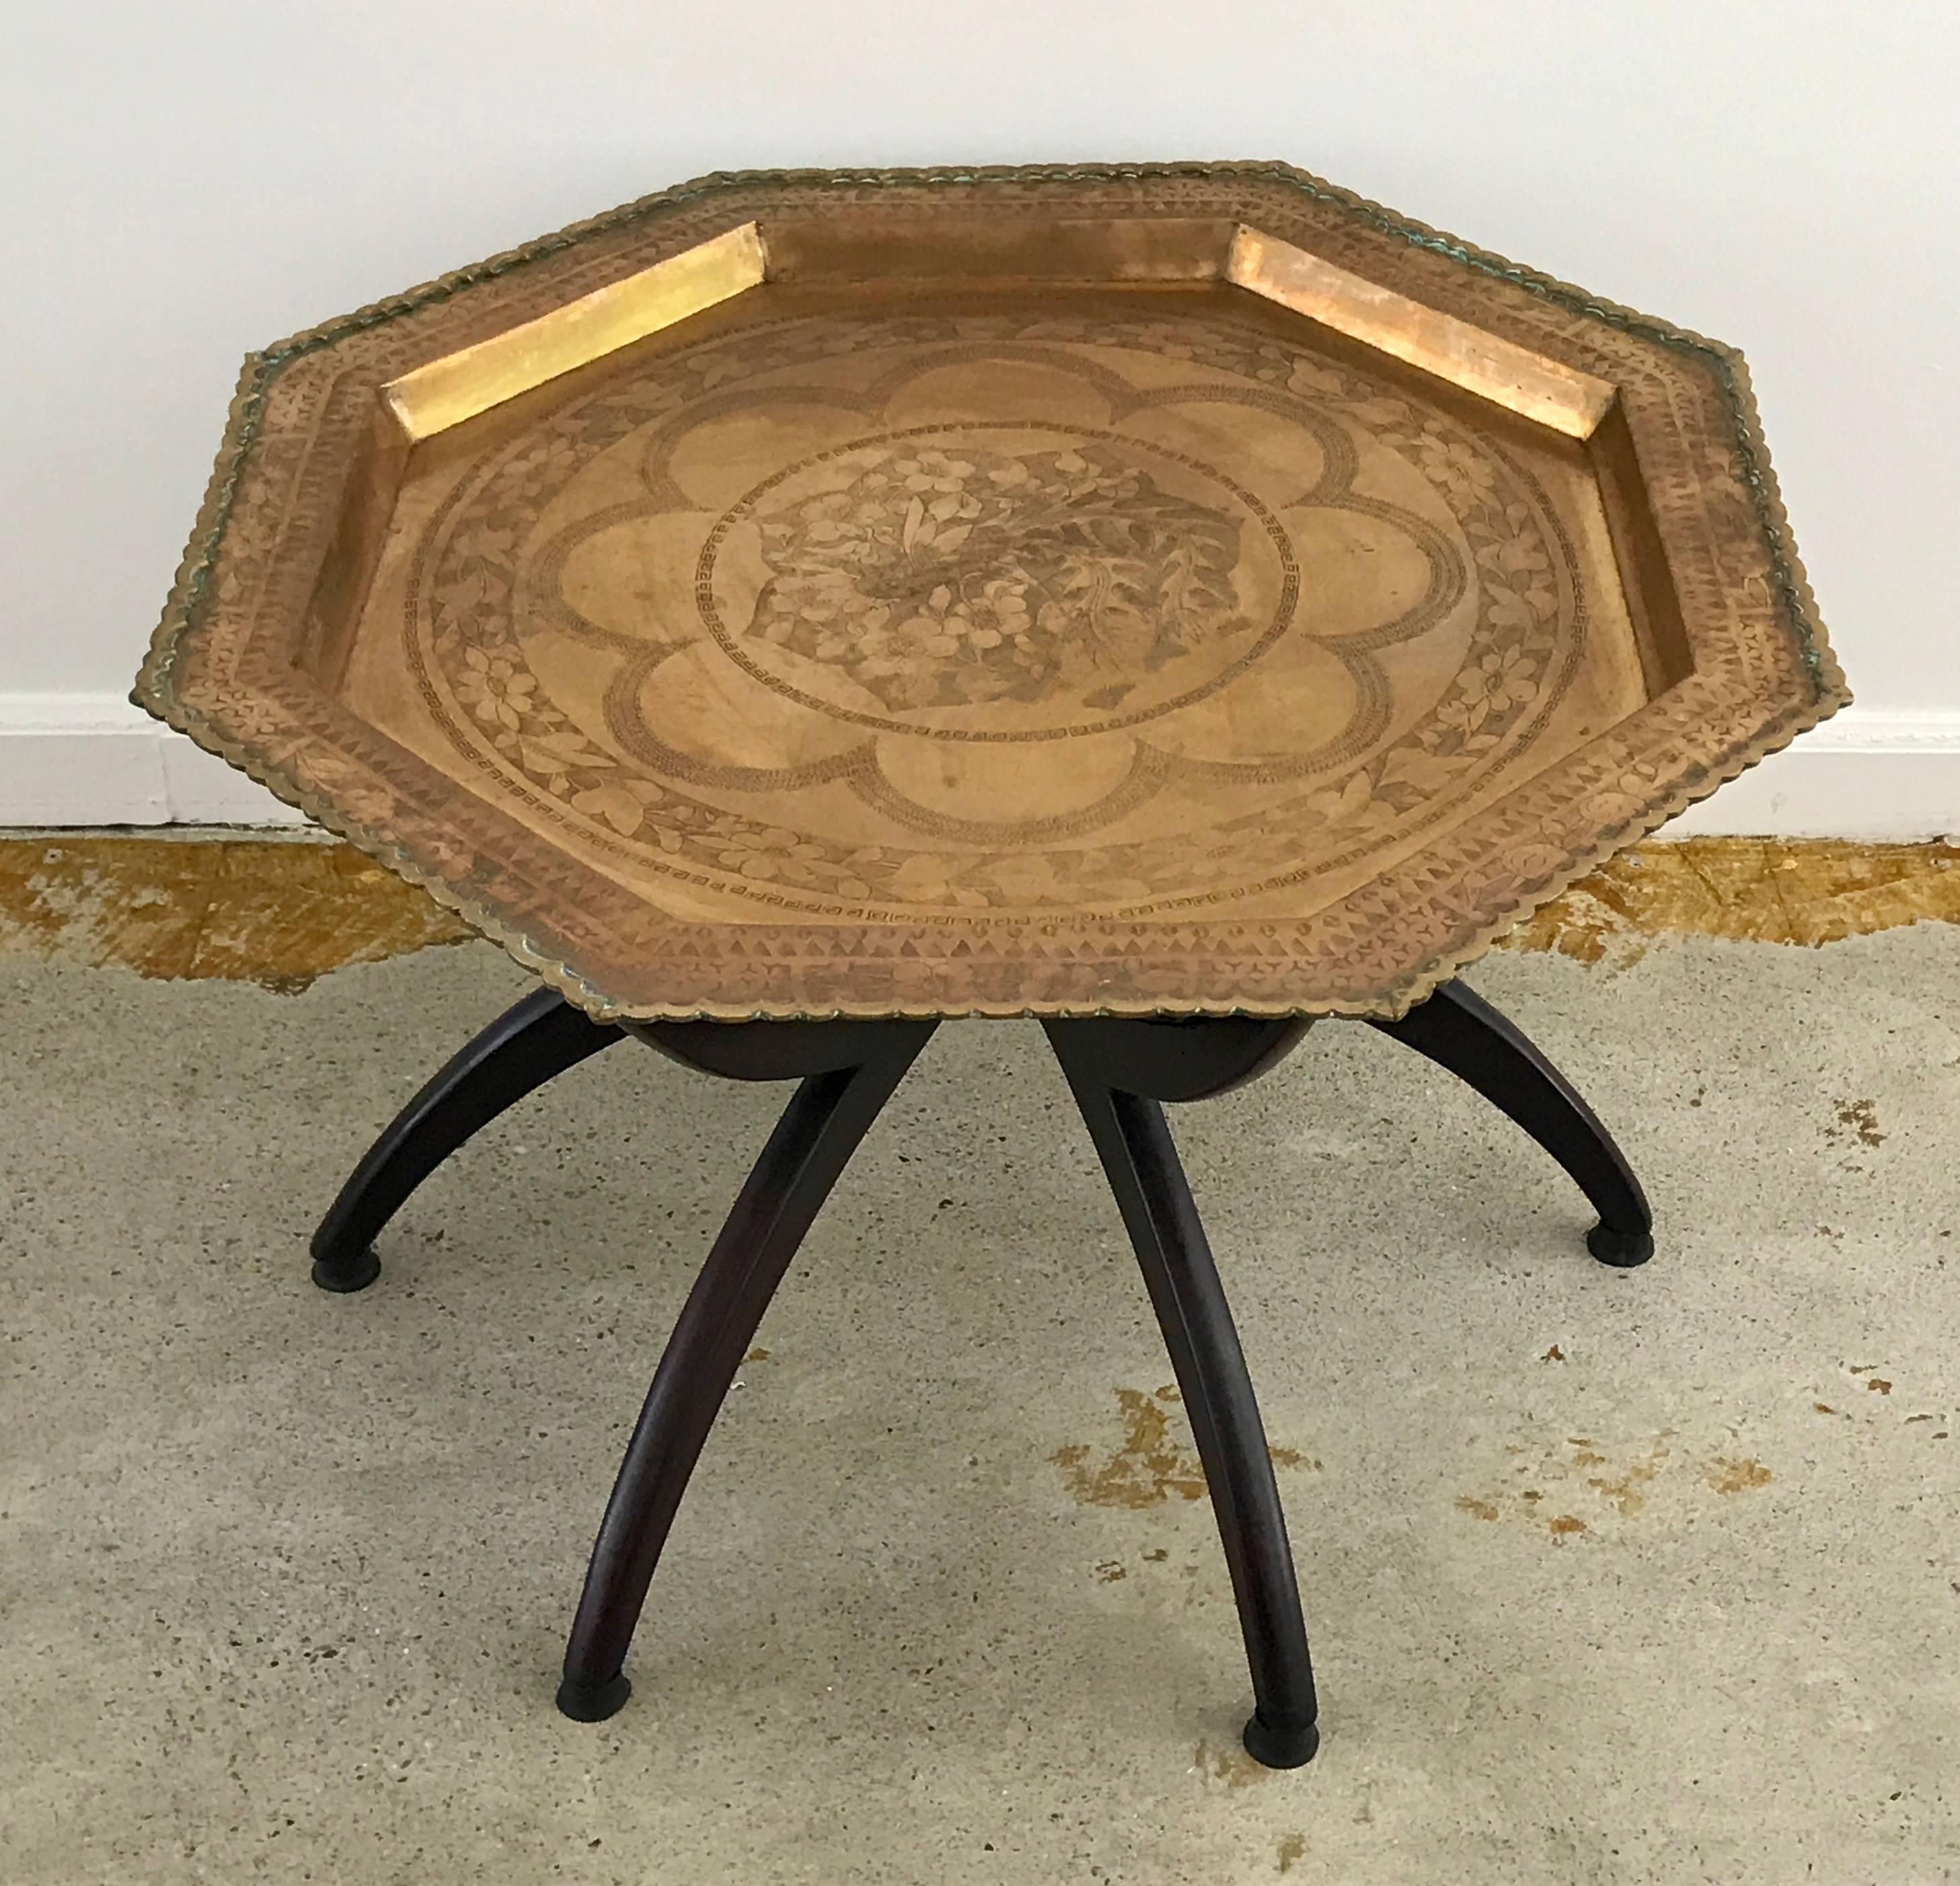 Beautifully detailed brass top tray table that rests on spider leg stand, circa 1950s. The octagon shaped tray is hand-etched and very intricate in detail. This piece was made in Hong Kong, unlike the mass produced trays from India and Morocco.